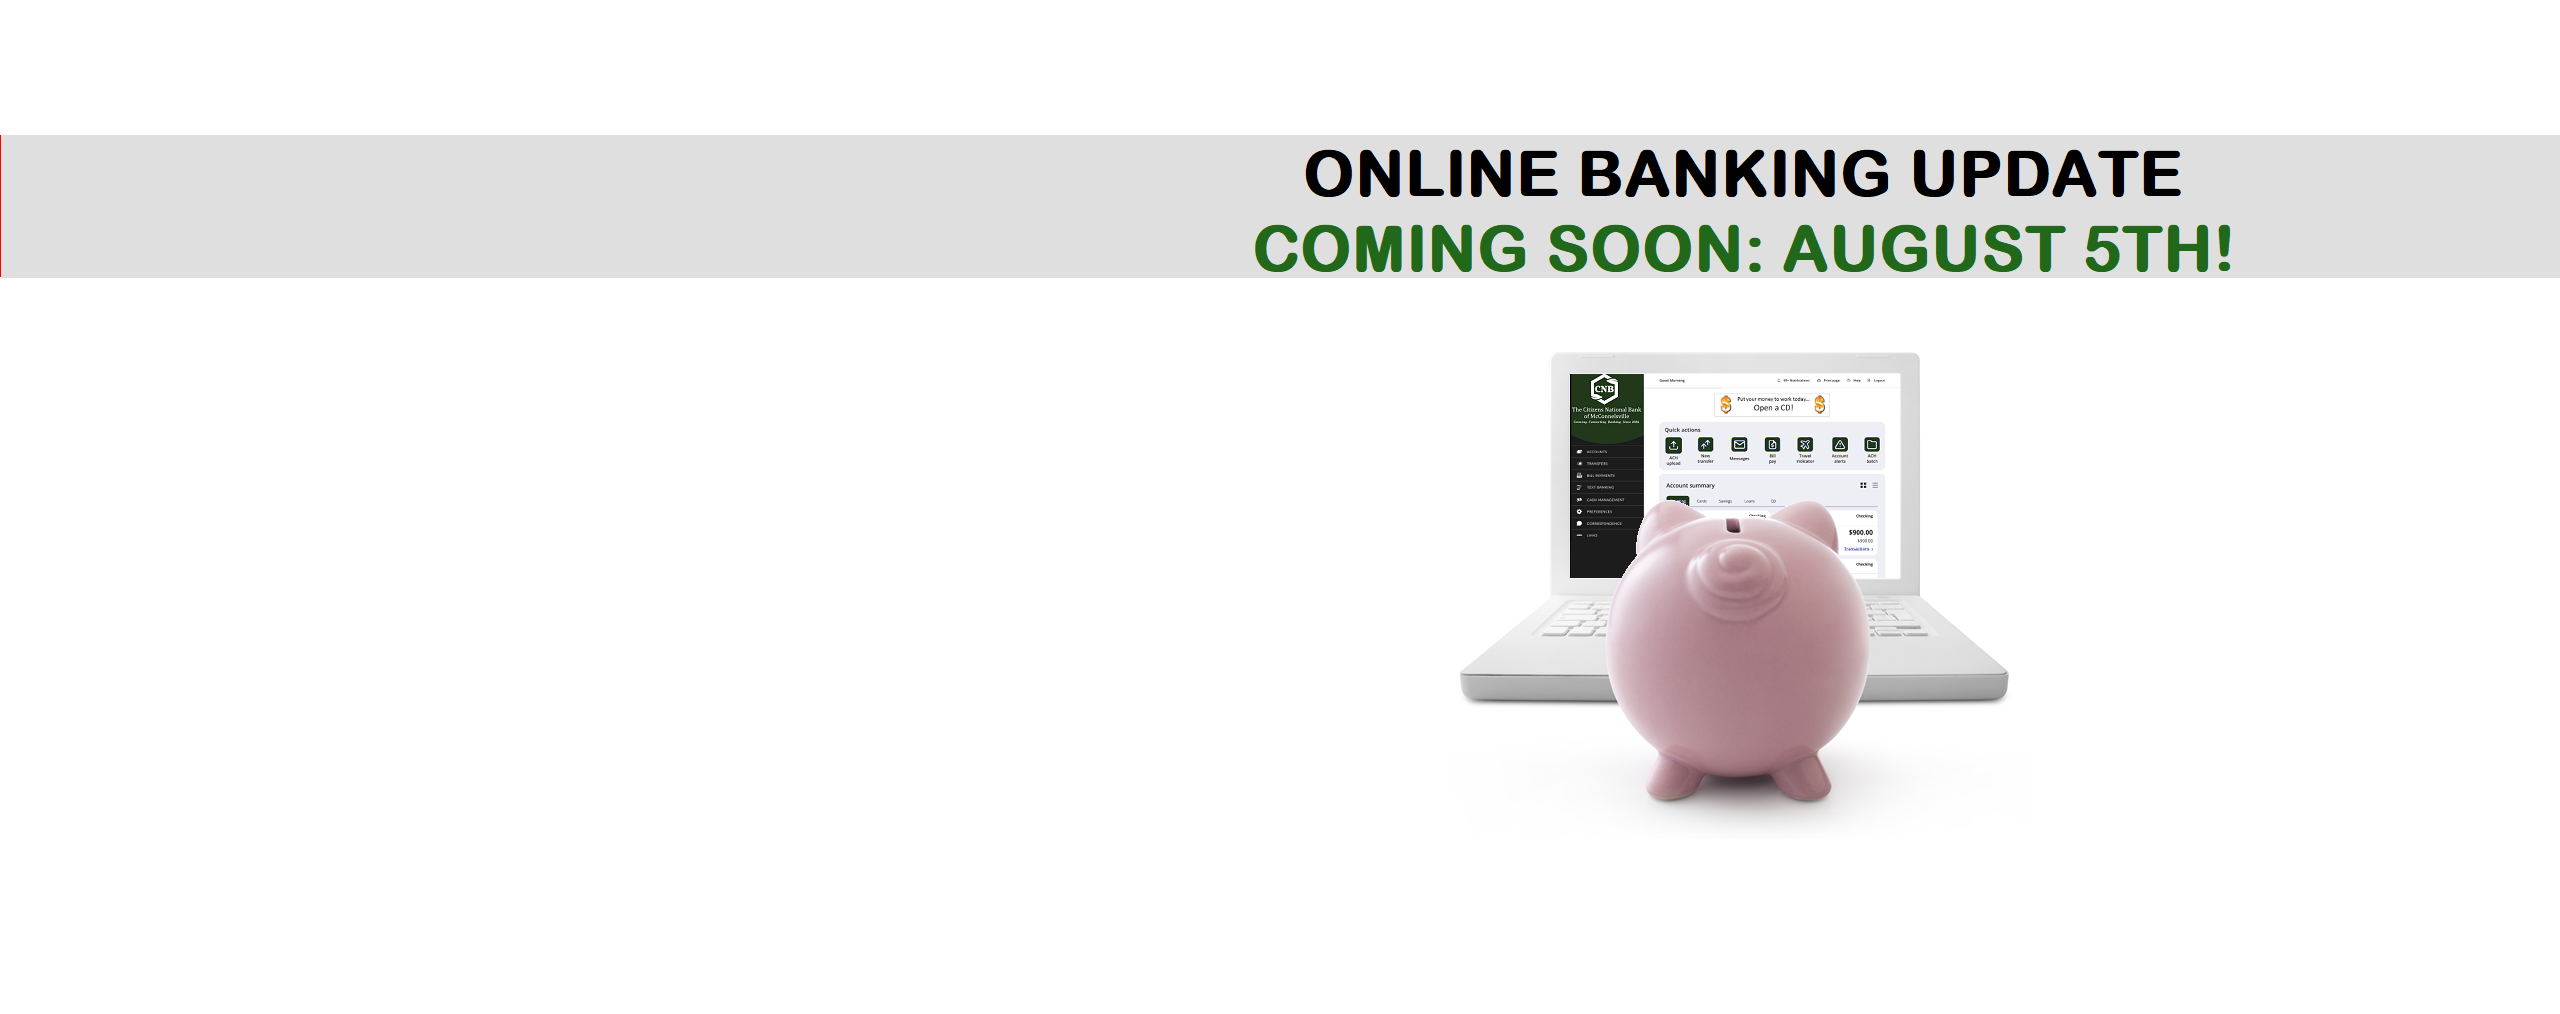 Online Banking Update coming August 5th